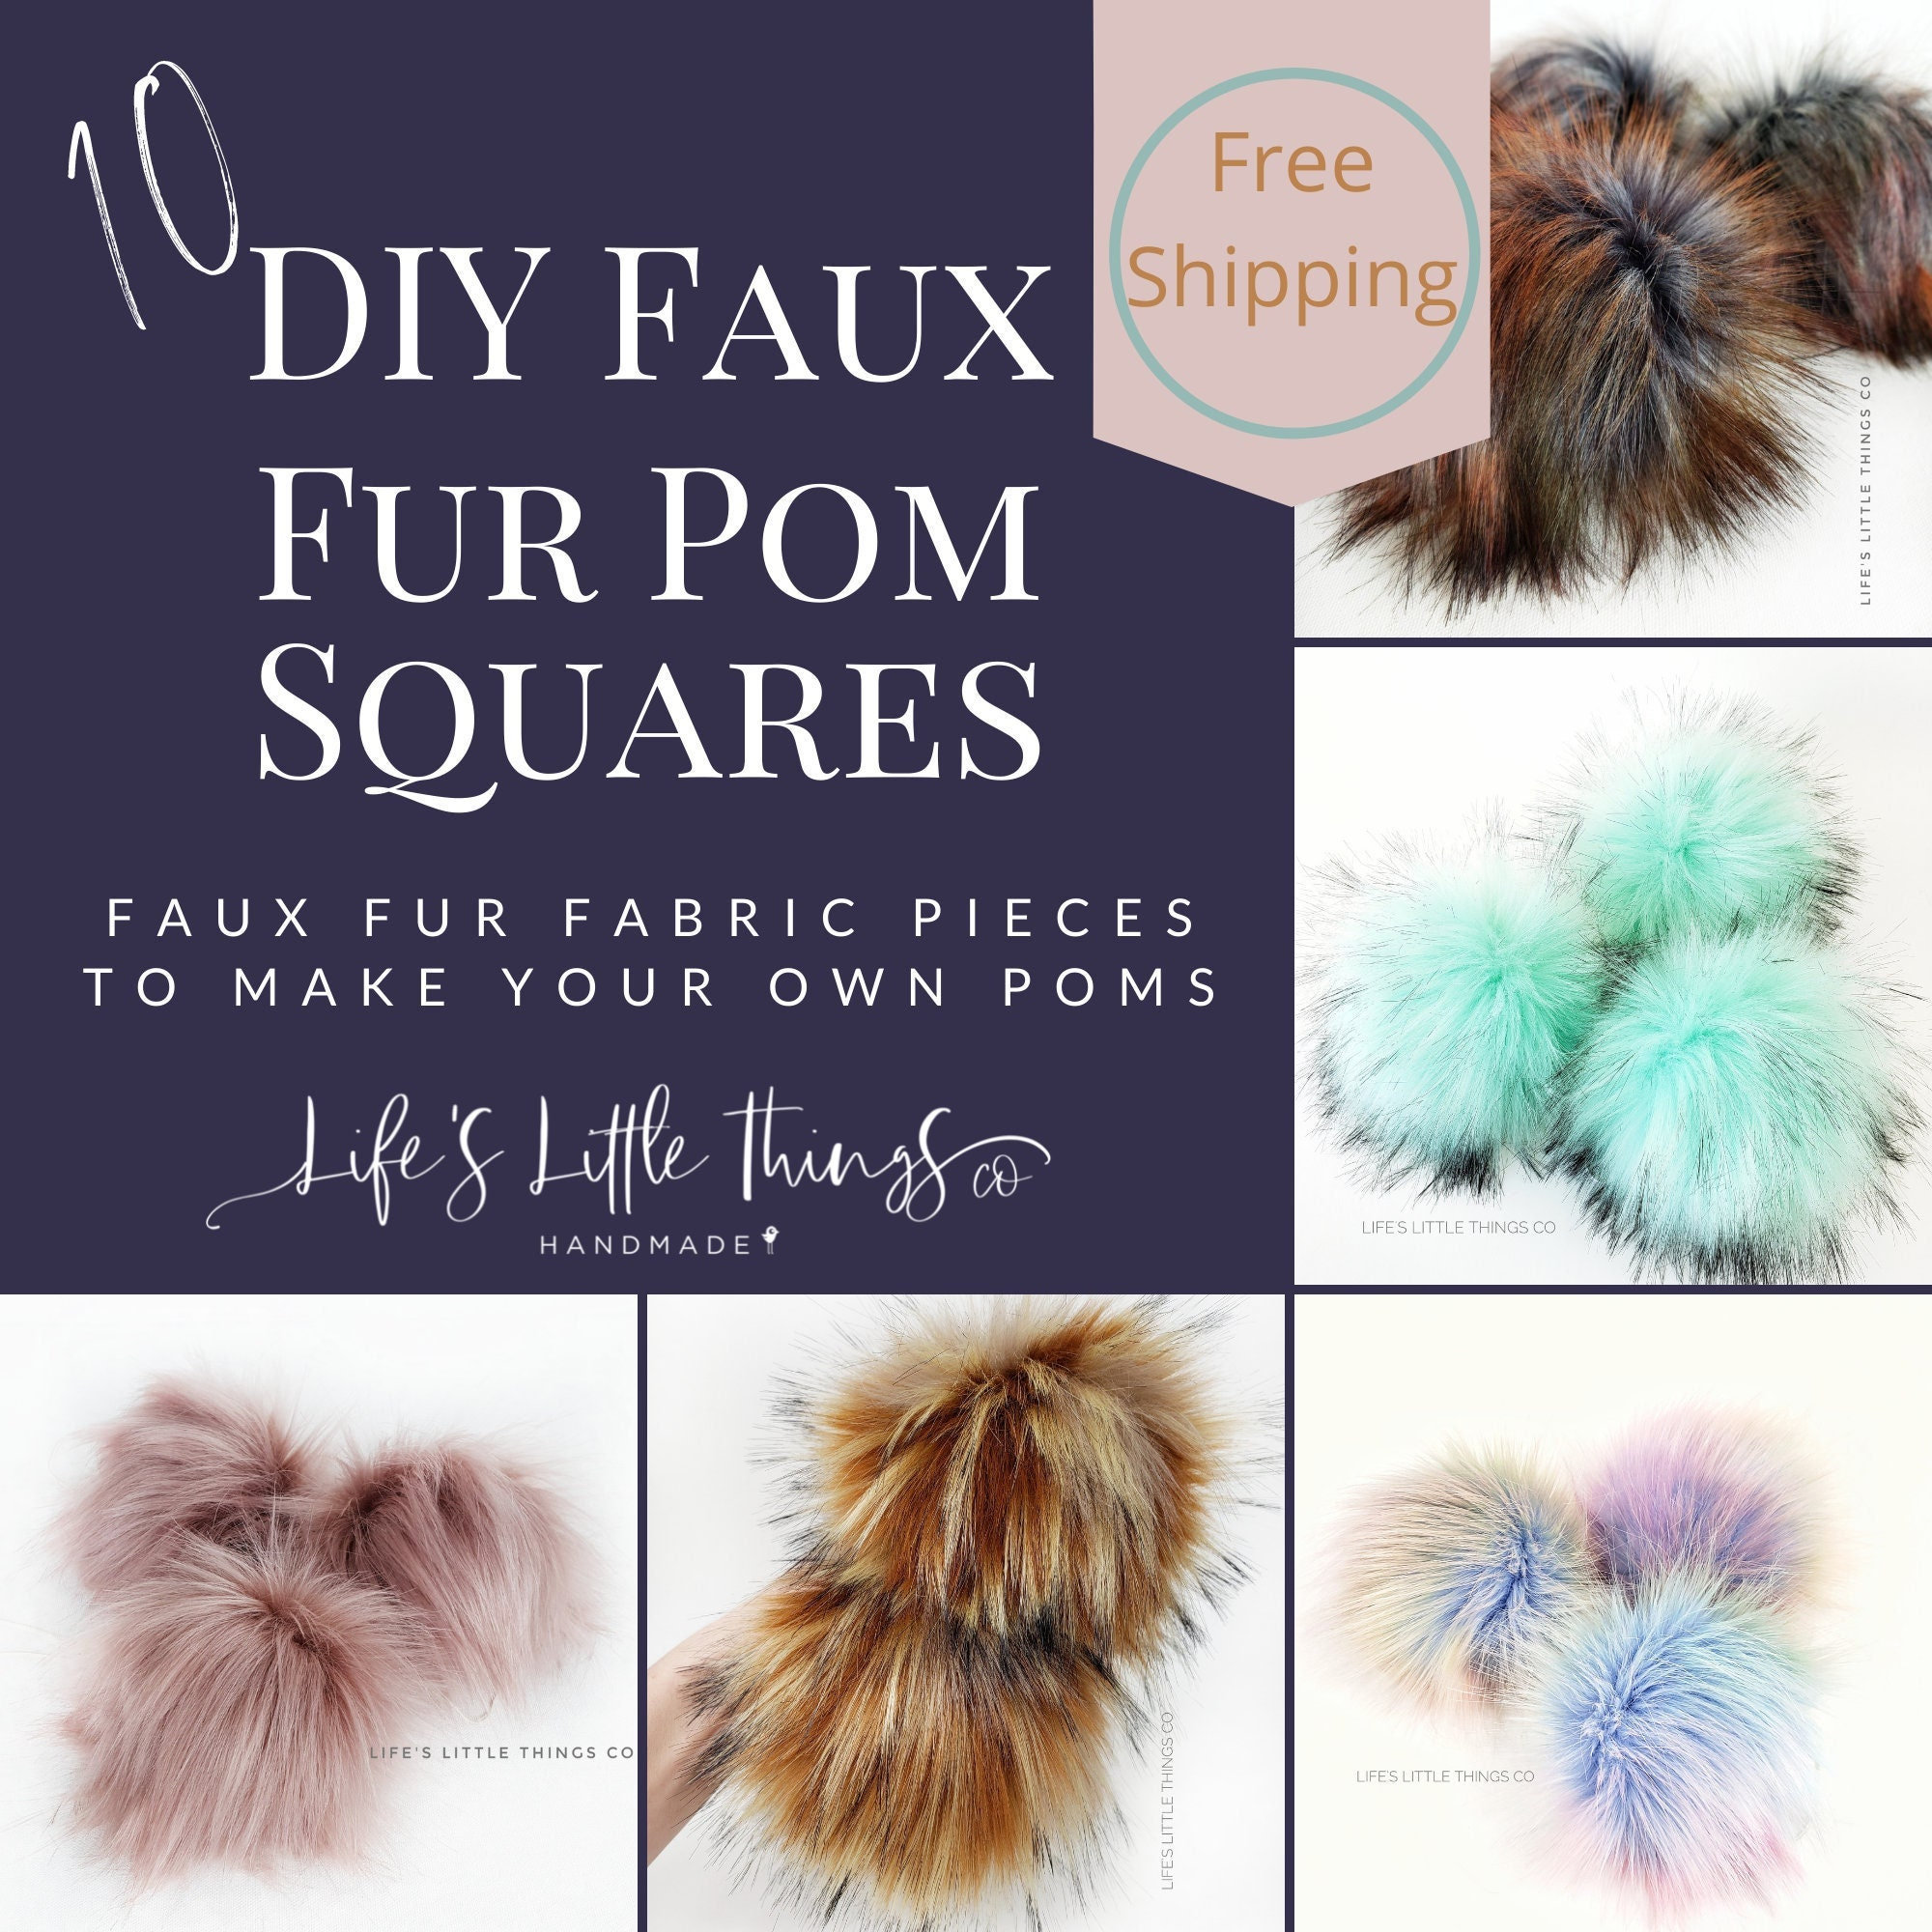 1 Pair of Faux Fur Pom Pom With Snaps for Hats, 6 Inch Fur Ball, 5 Fake Fur  Pom Poms,5 Inch Furry Pom Poms Por Knitted Hats 2pcs 